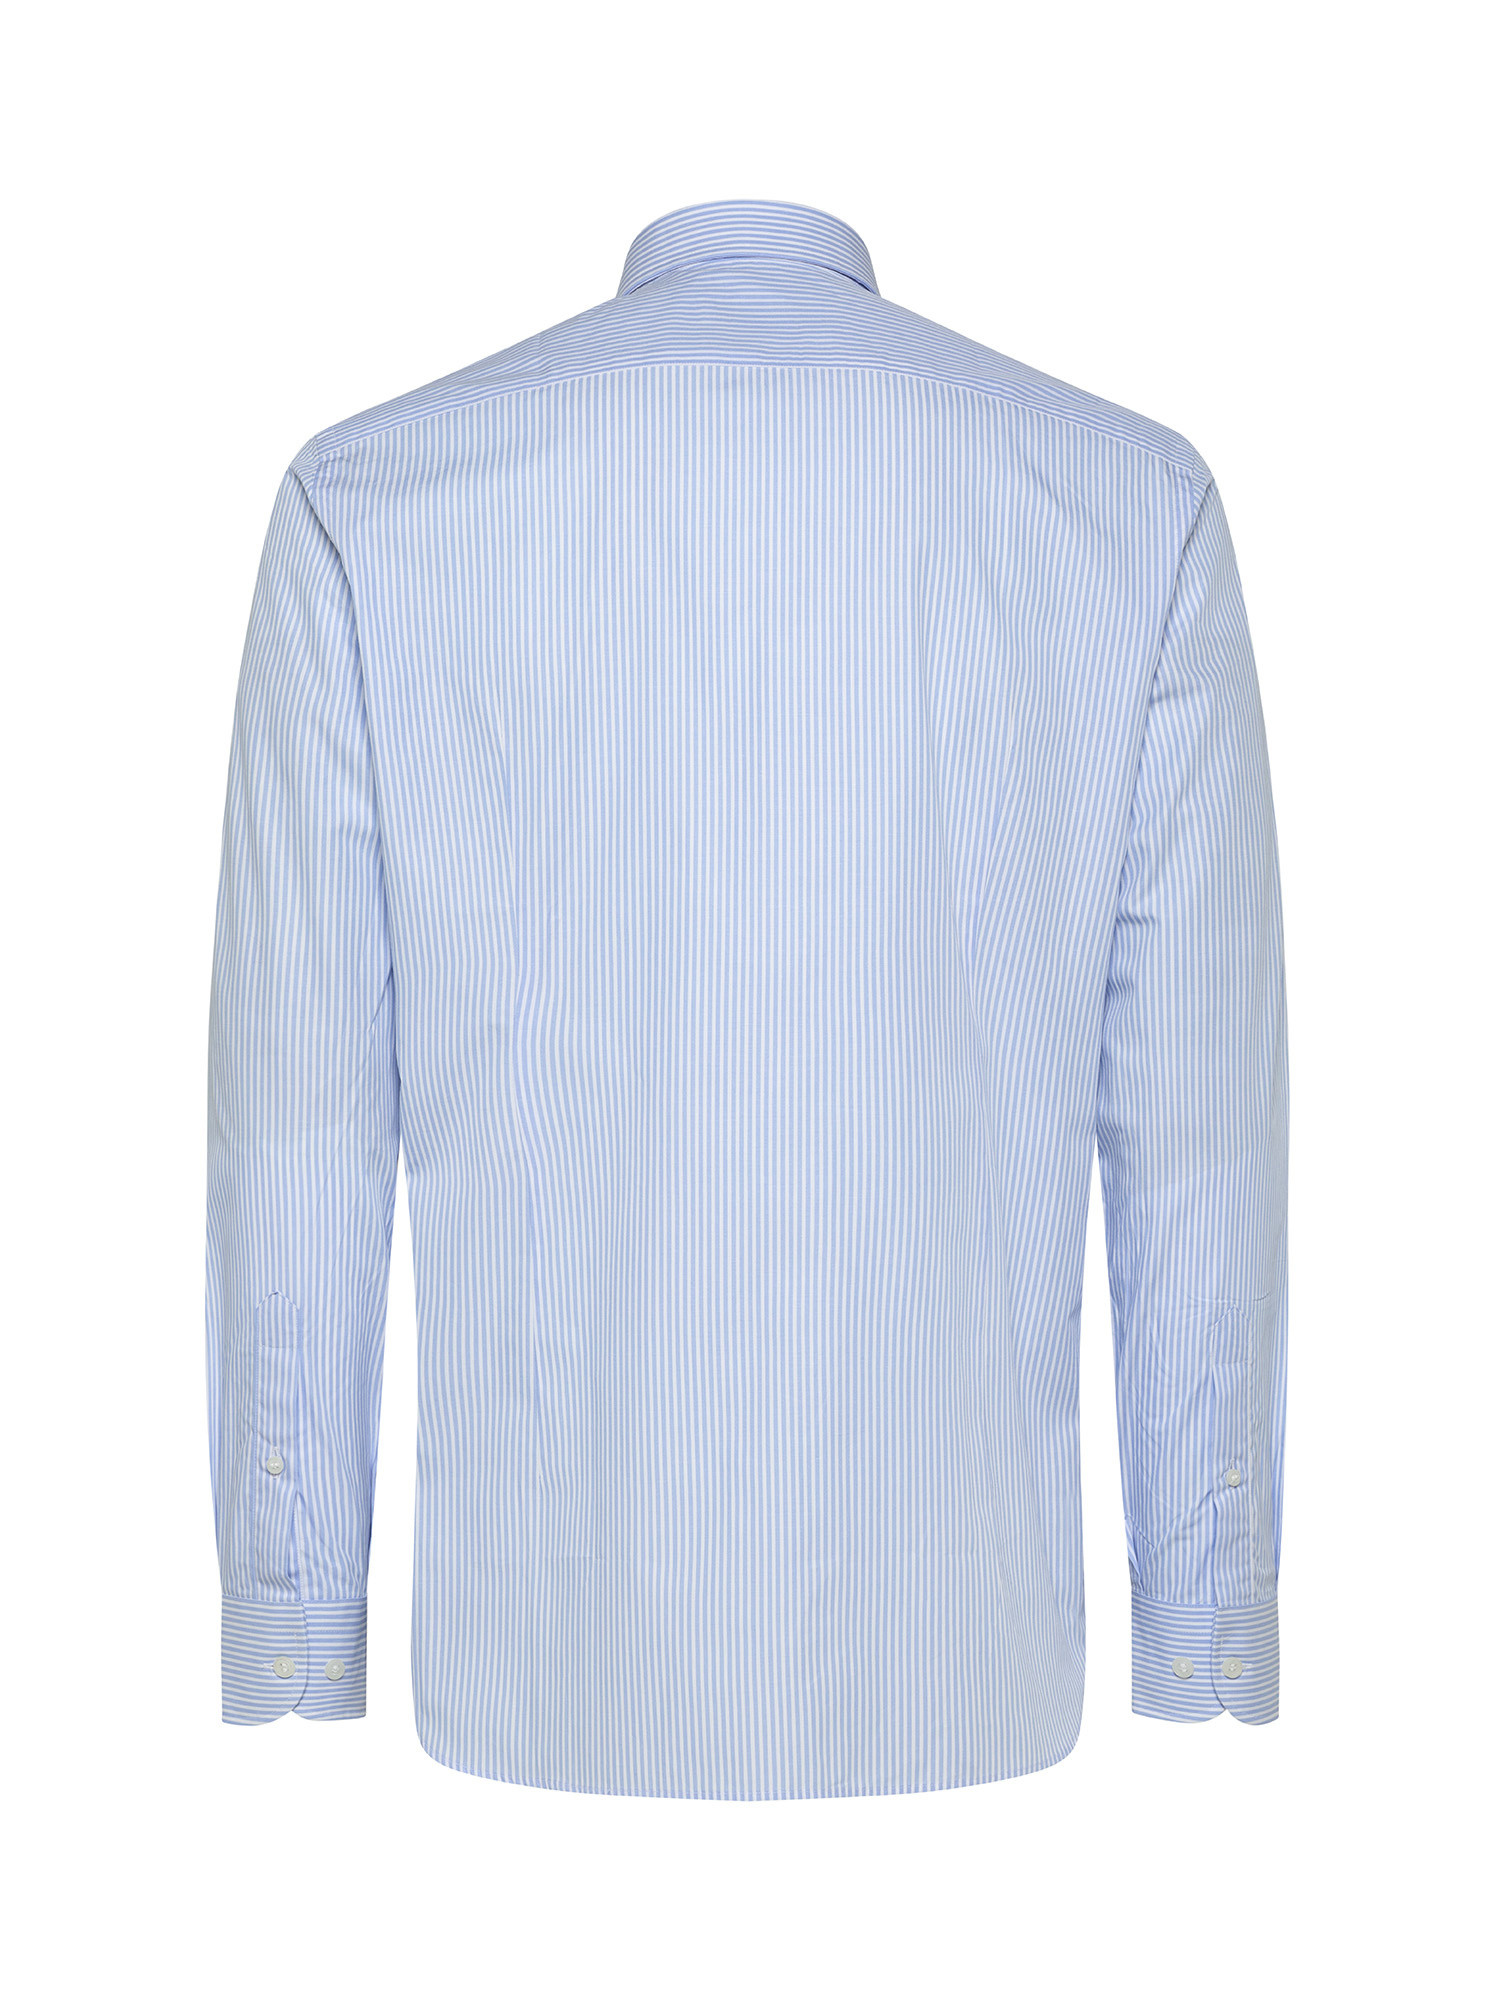 Slim fit shirt in pure cotton, White Milk, large image number 2